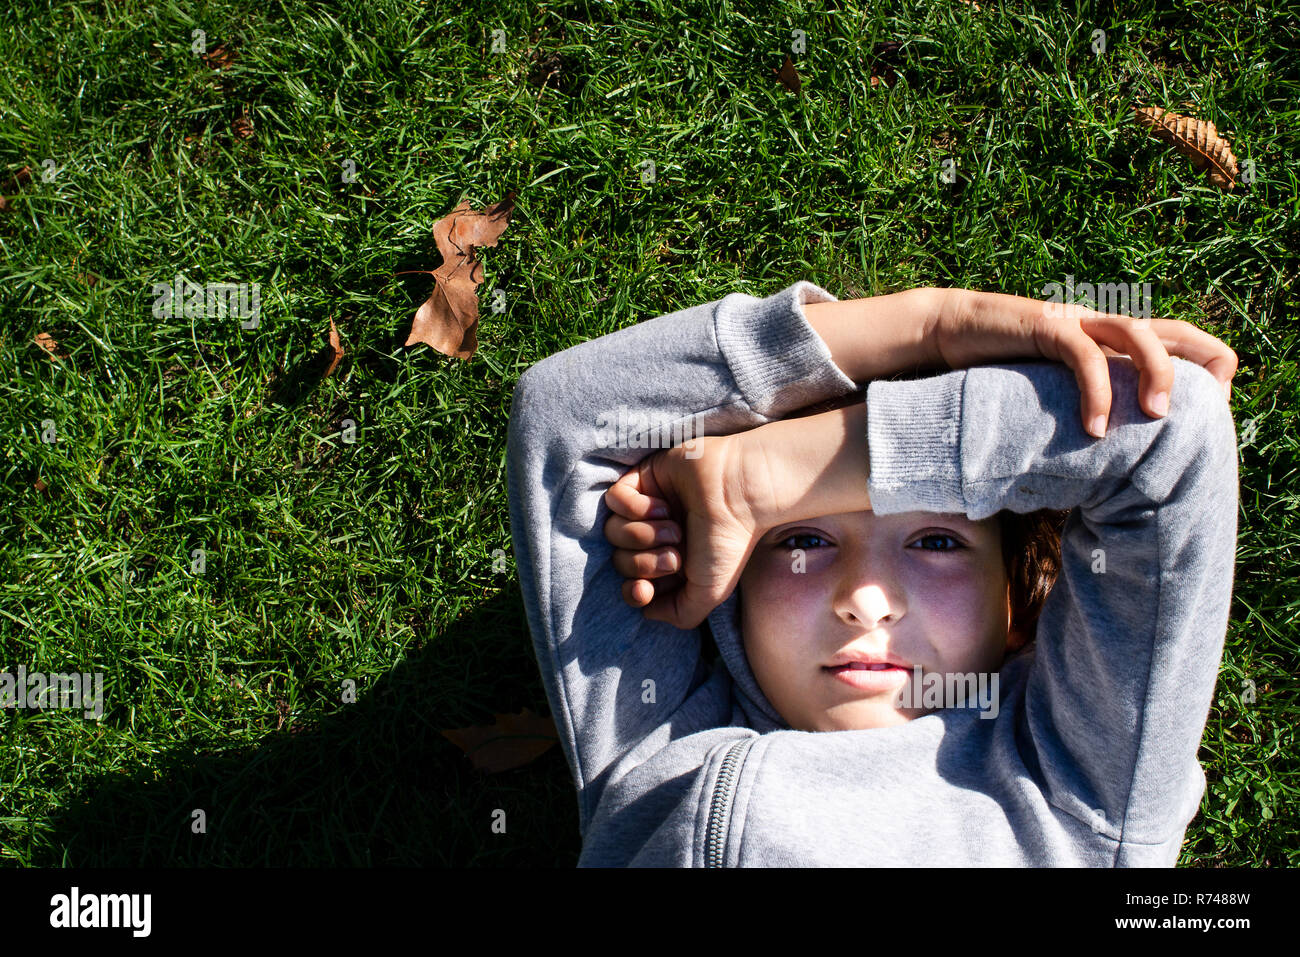 Boy on grass blocking sunlight with arms Stock Photo